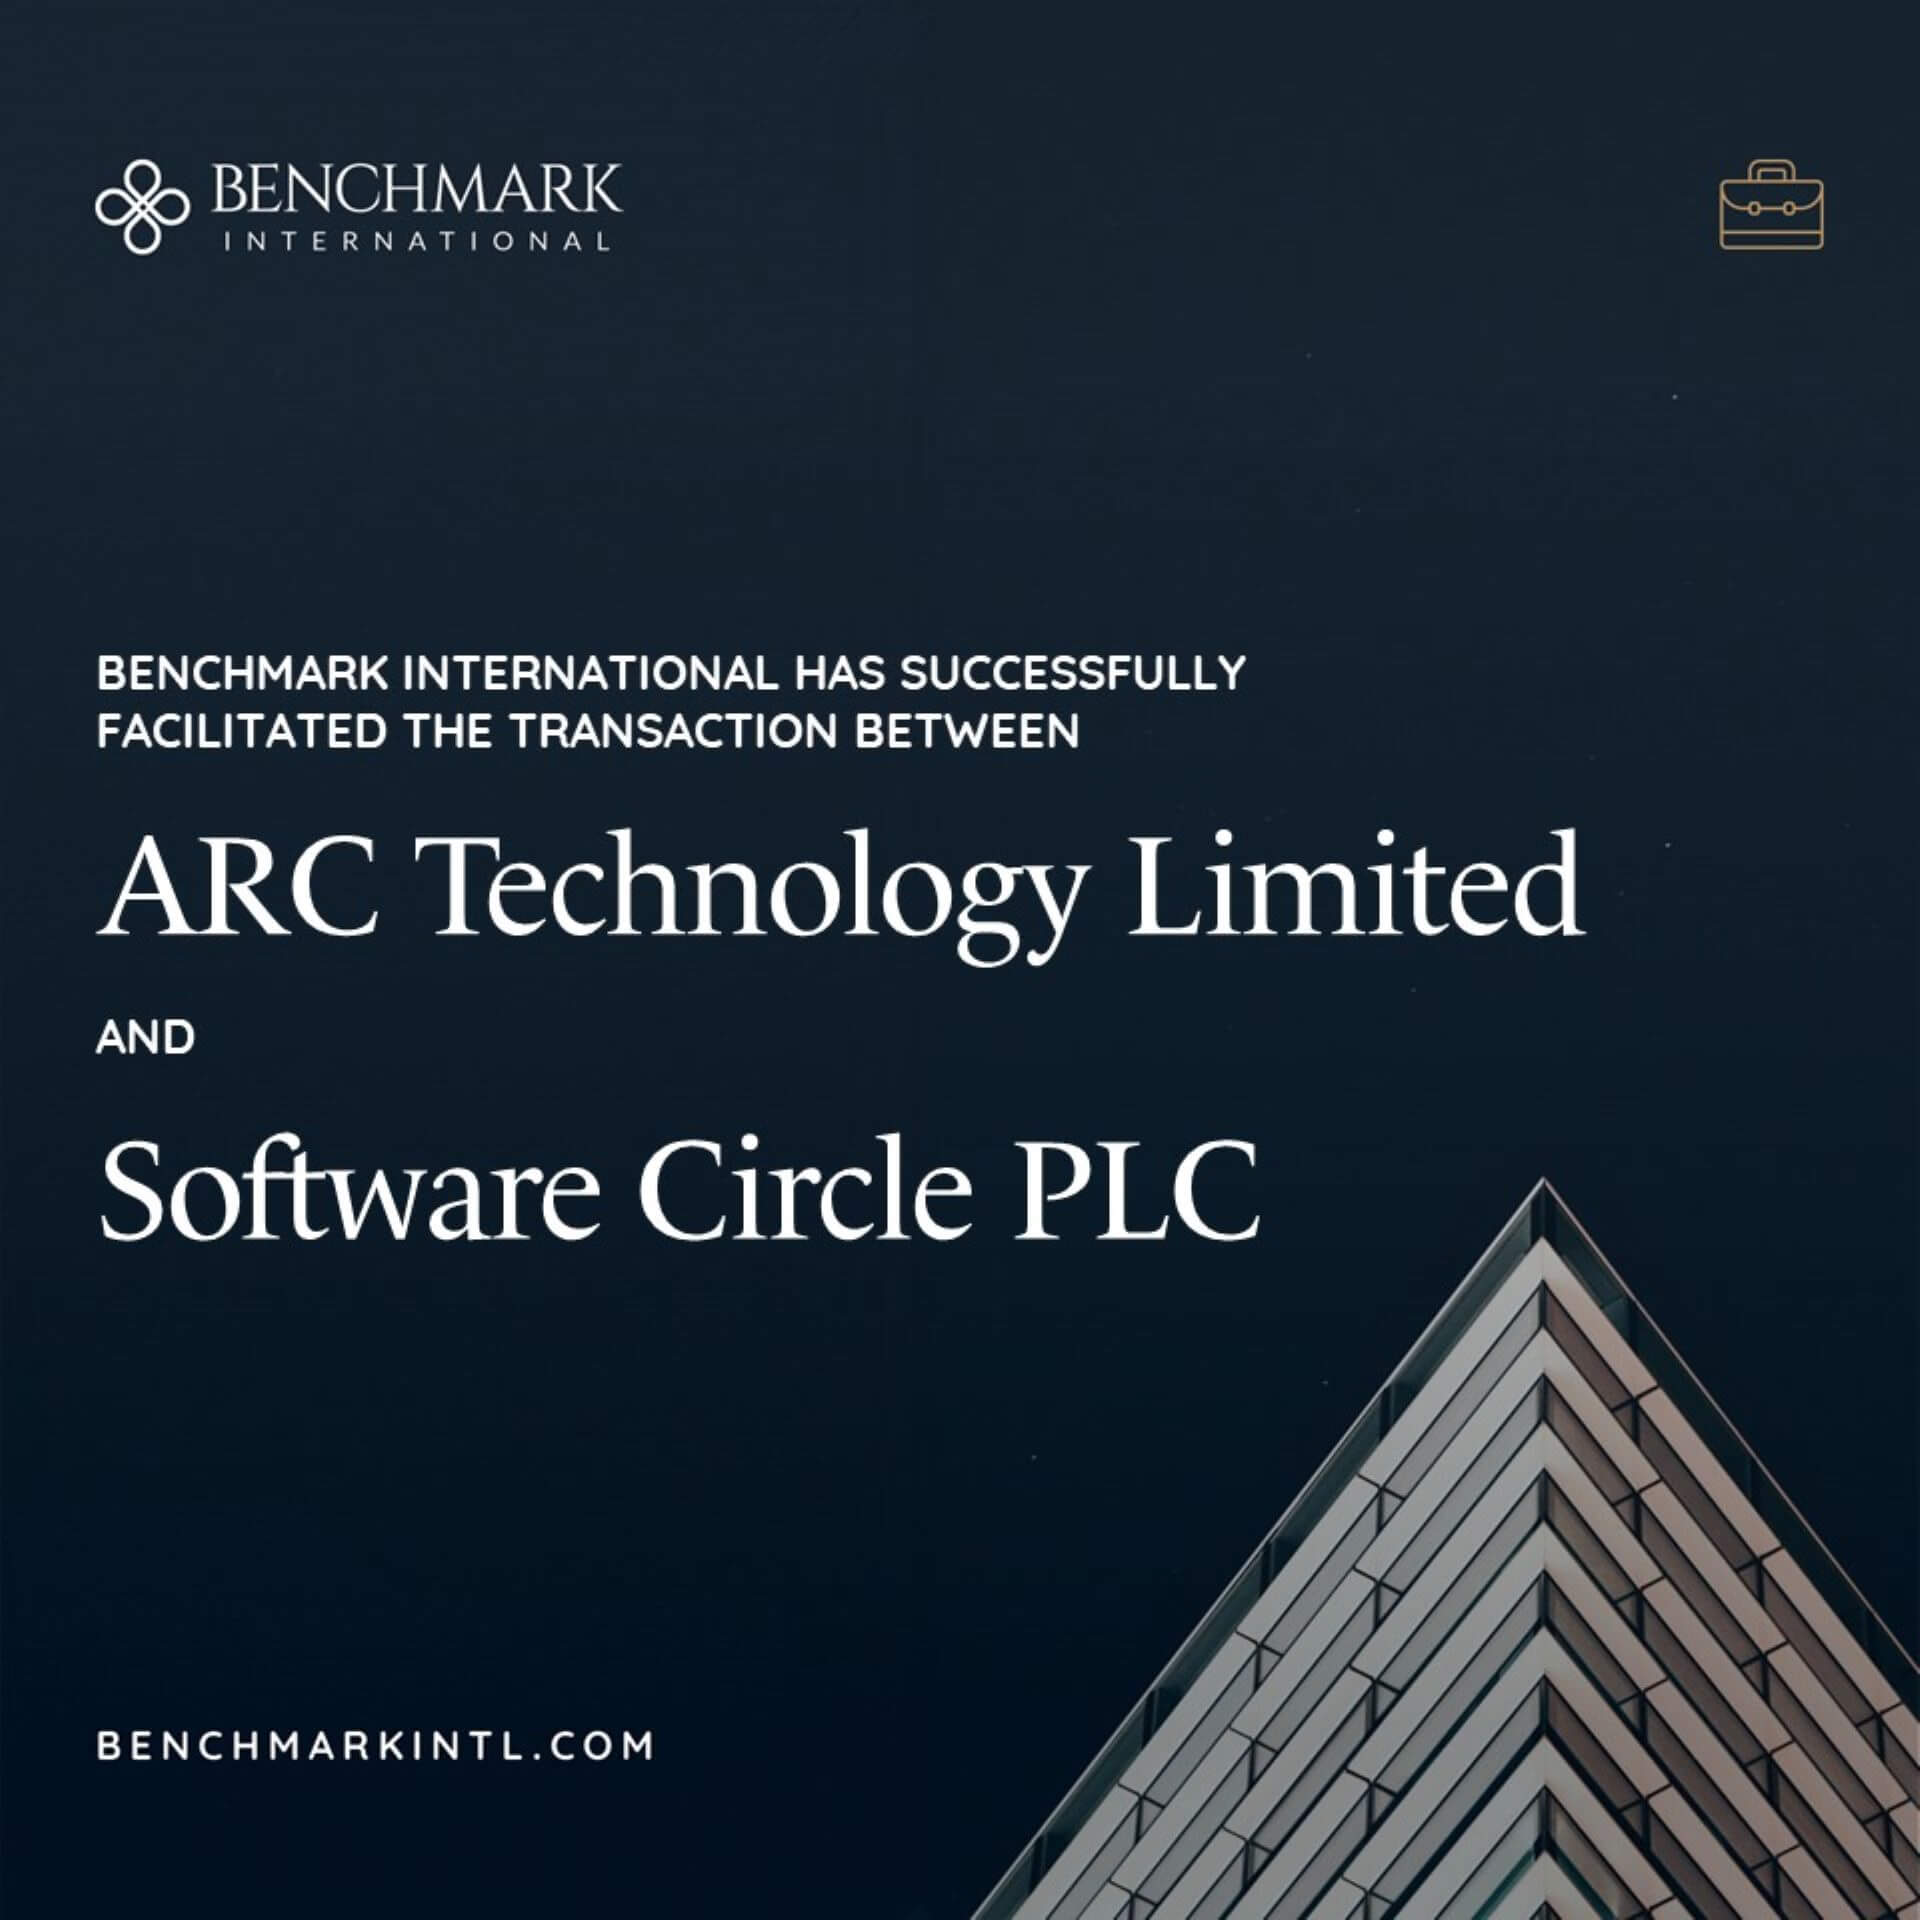 ARC Technology acquired by Software Circle